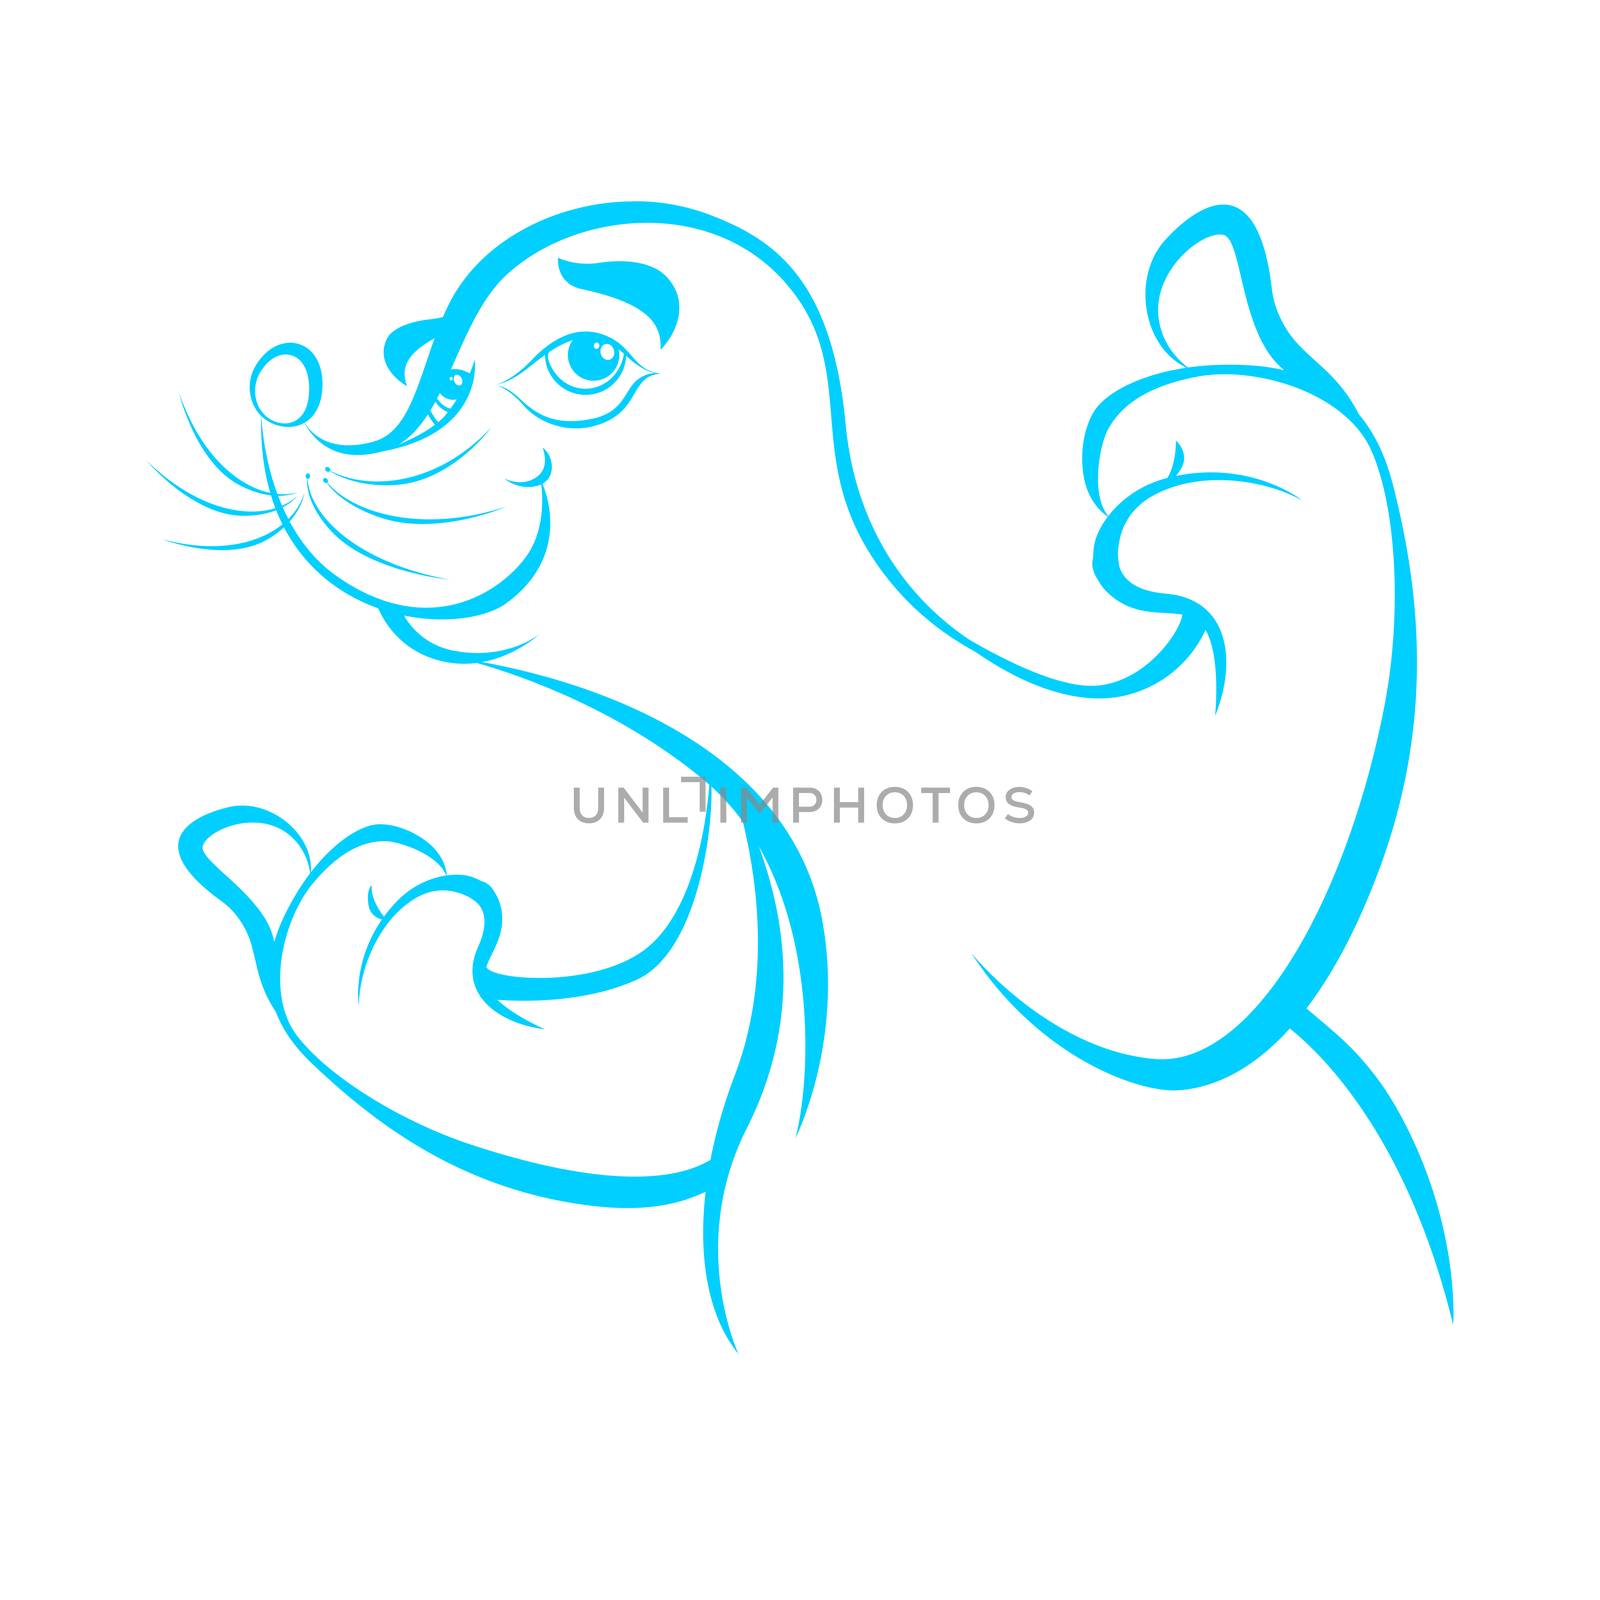 A beautiful illustration of a seal, which can be used for educational purposes and the like